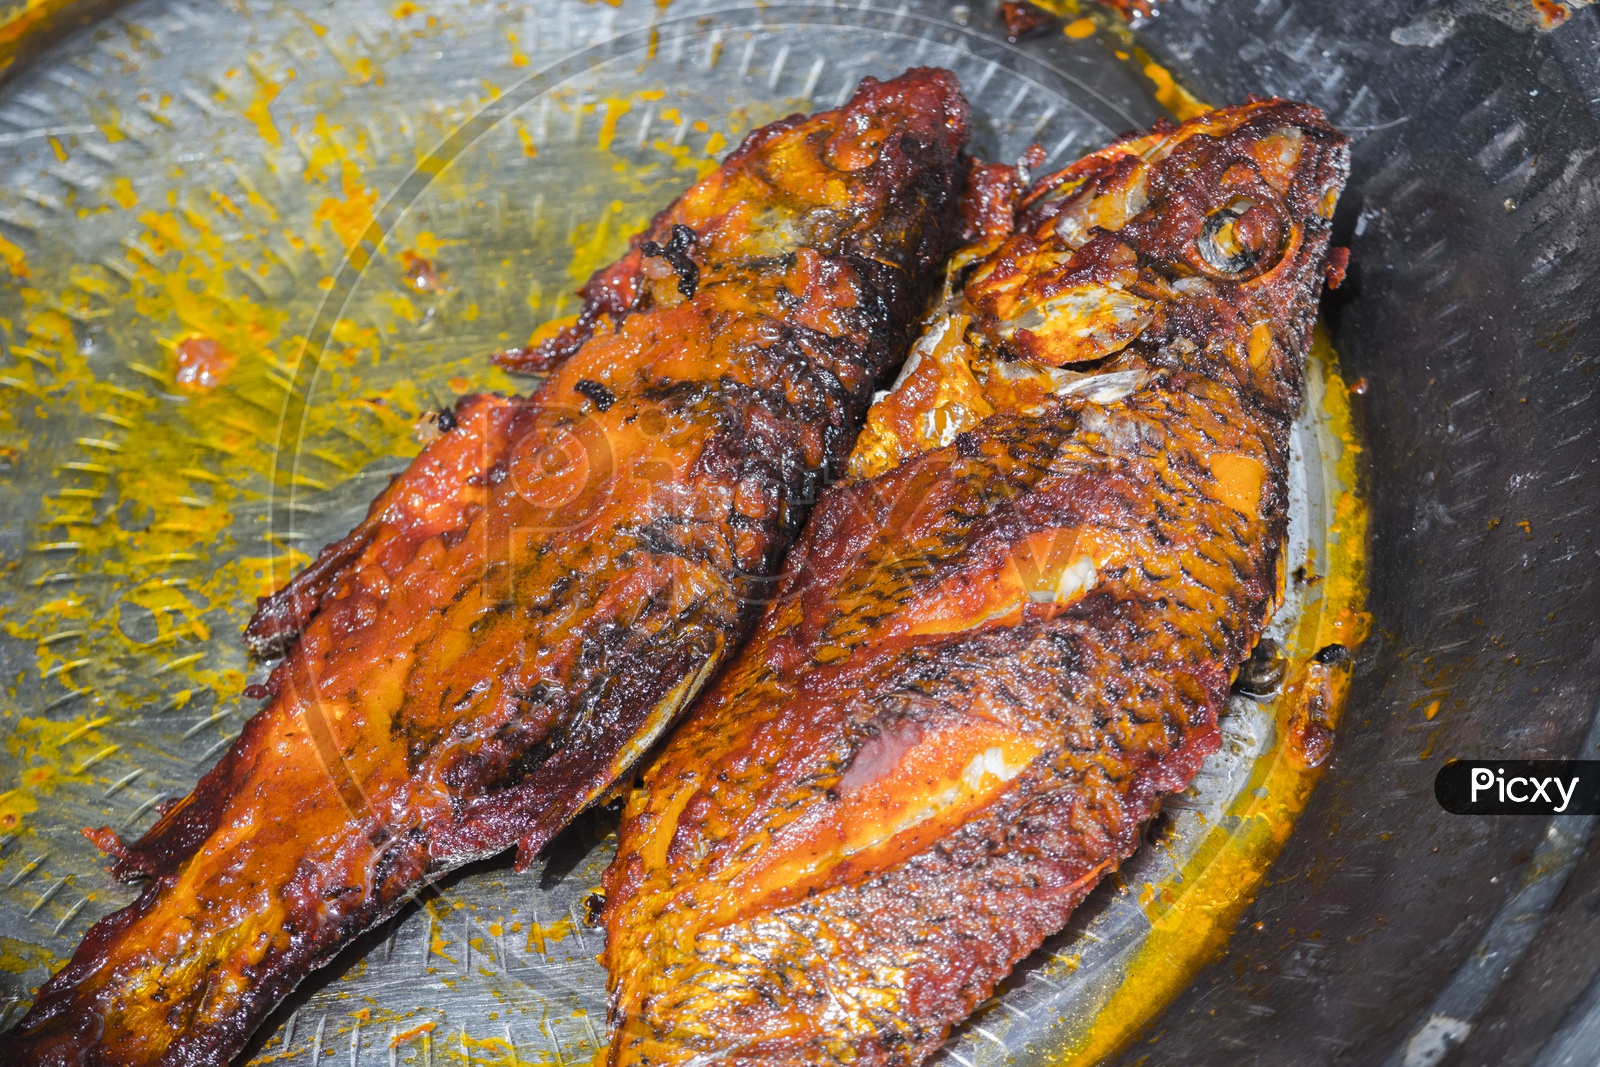 The cooking process of Fish fry in Hogenekkal.